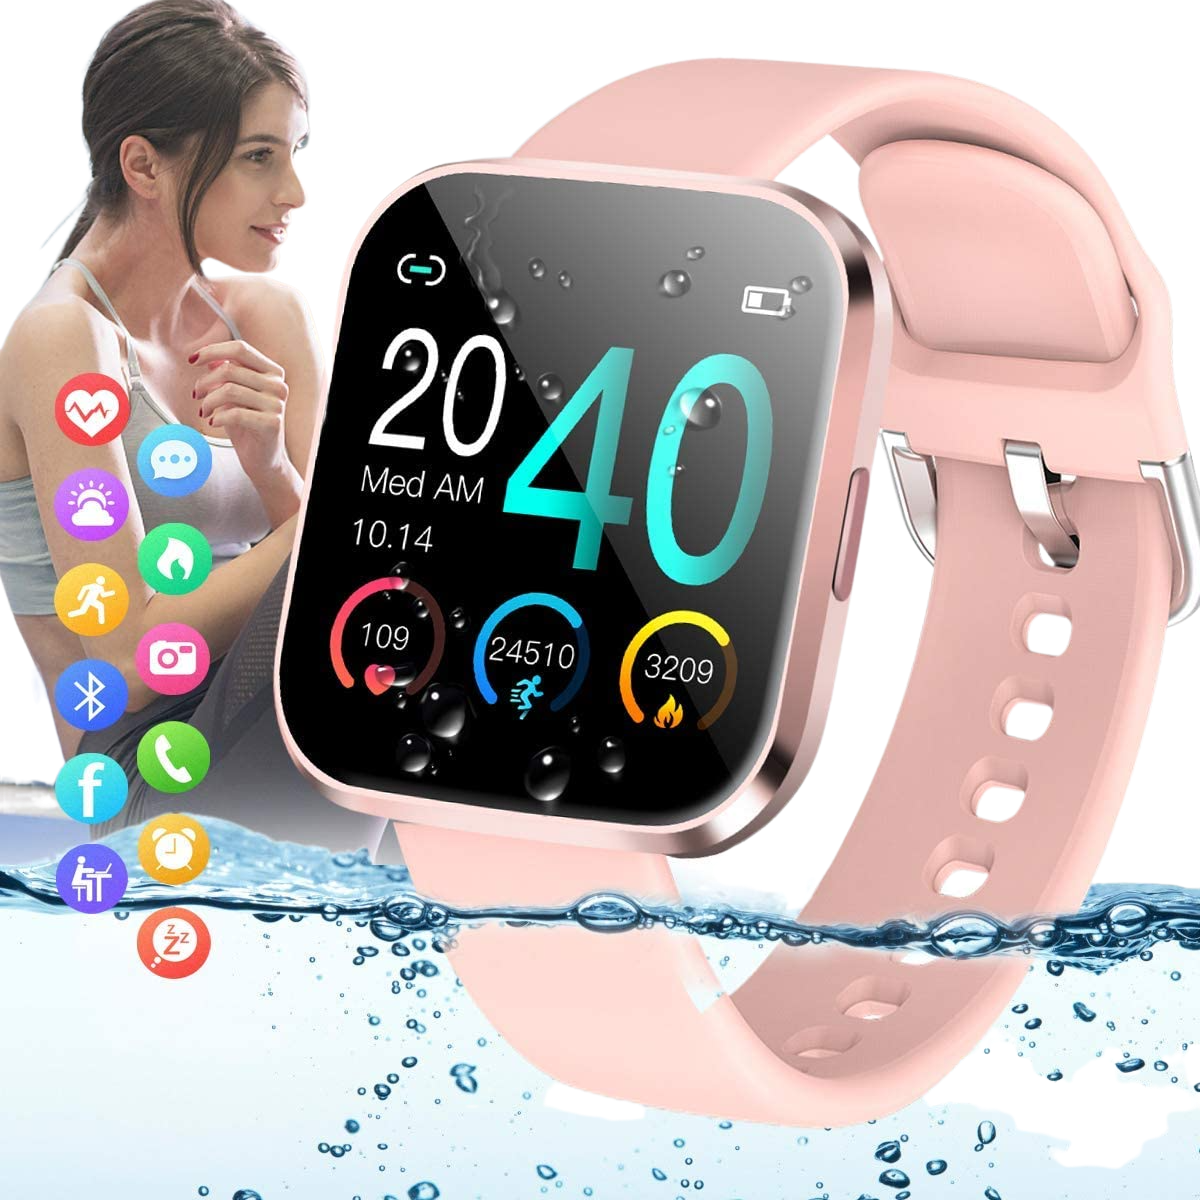 Smart Watch,Fitness Watch Activity Tracker with Heart Rate Blood Pressure Monitor IP67 Waterproof Bluetooth Smartwatch Touch Screen Sports for Android iOS Phones (Renewed) Pink - Home Decor Gifts and More